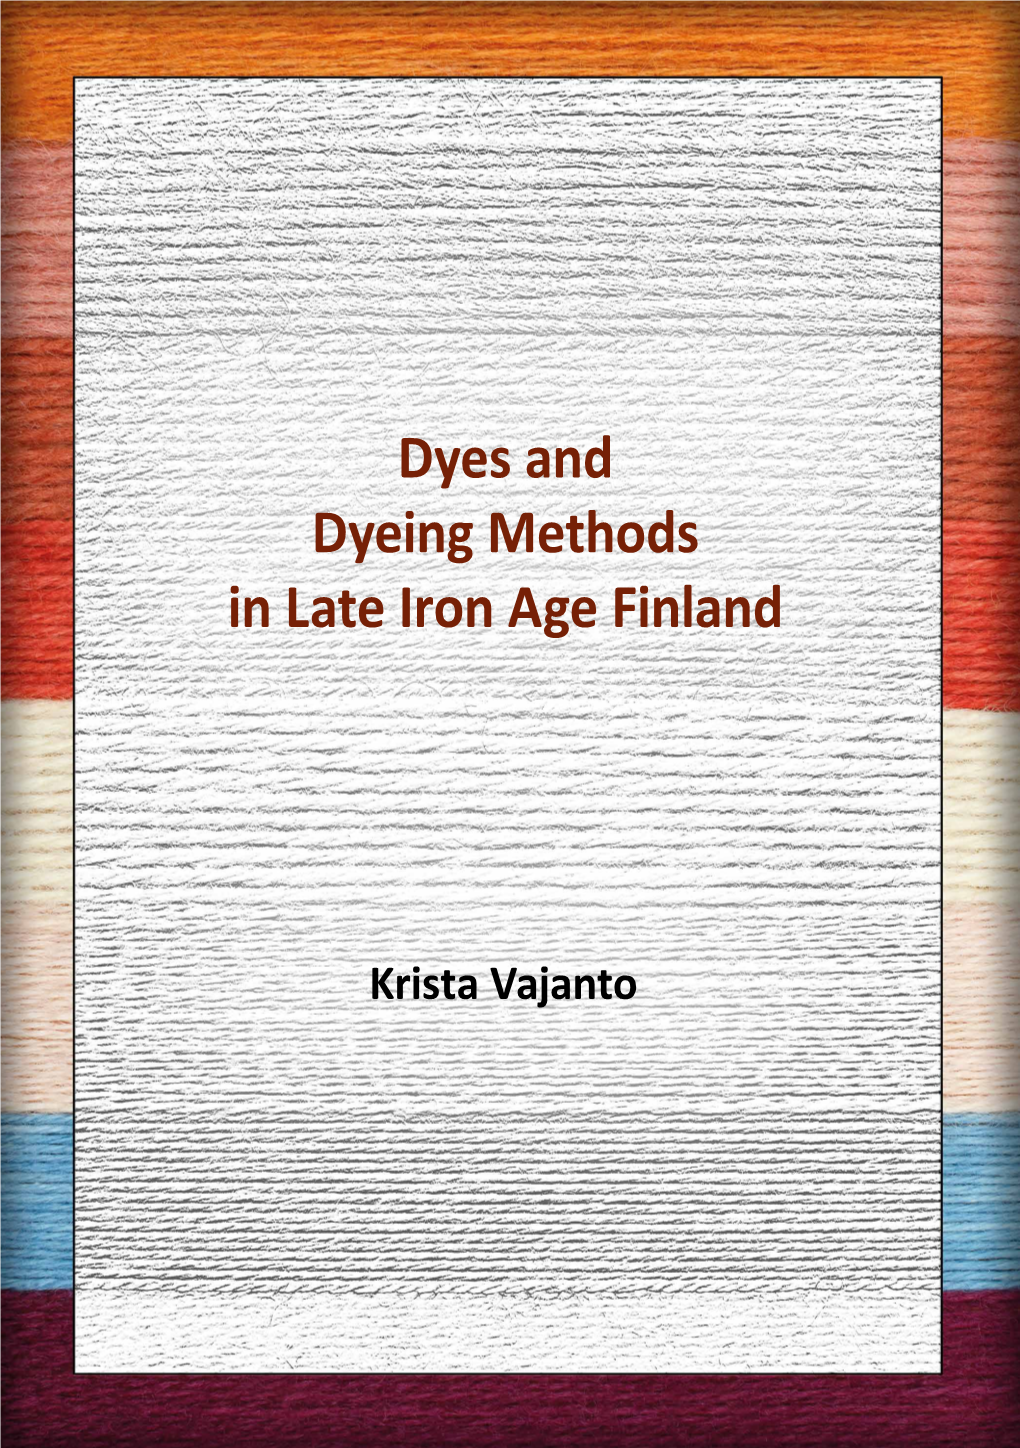 Dyes and Dyeing Methods in Late Iron Age Finland